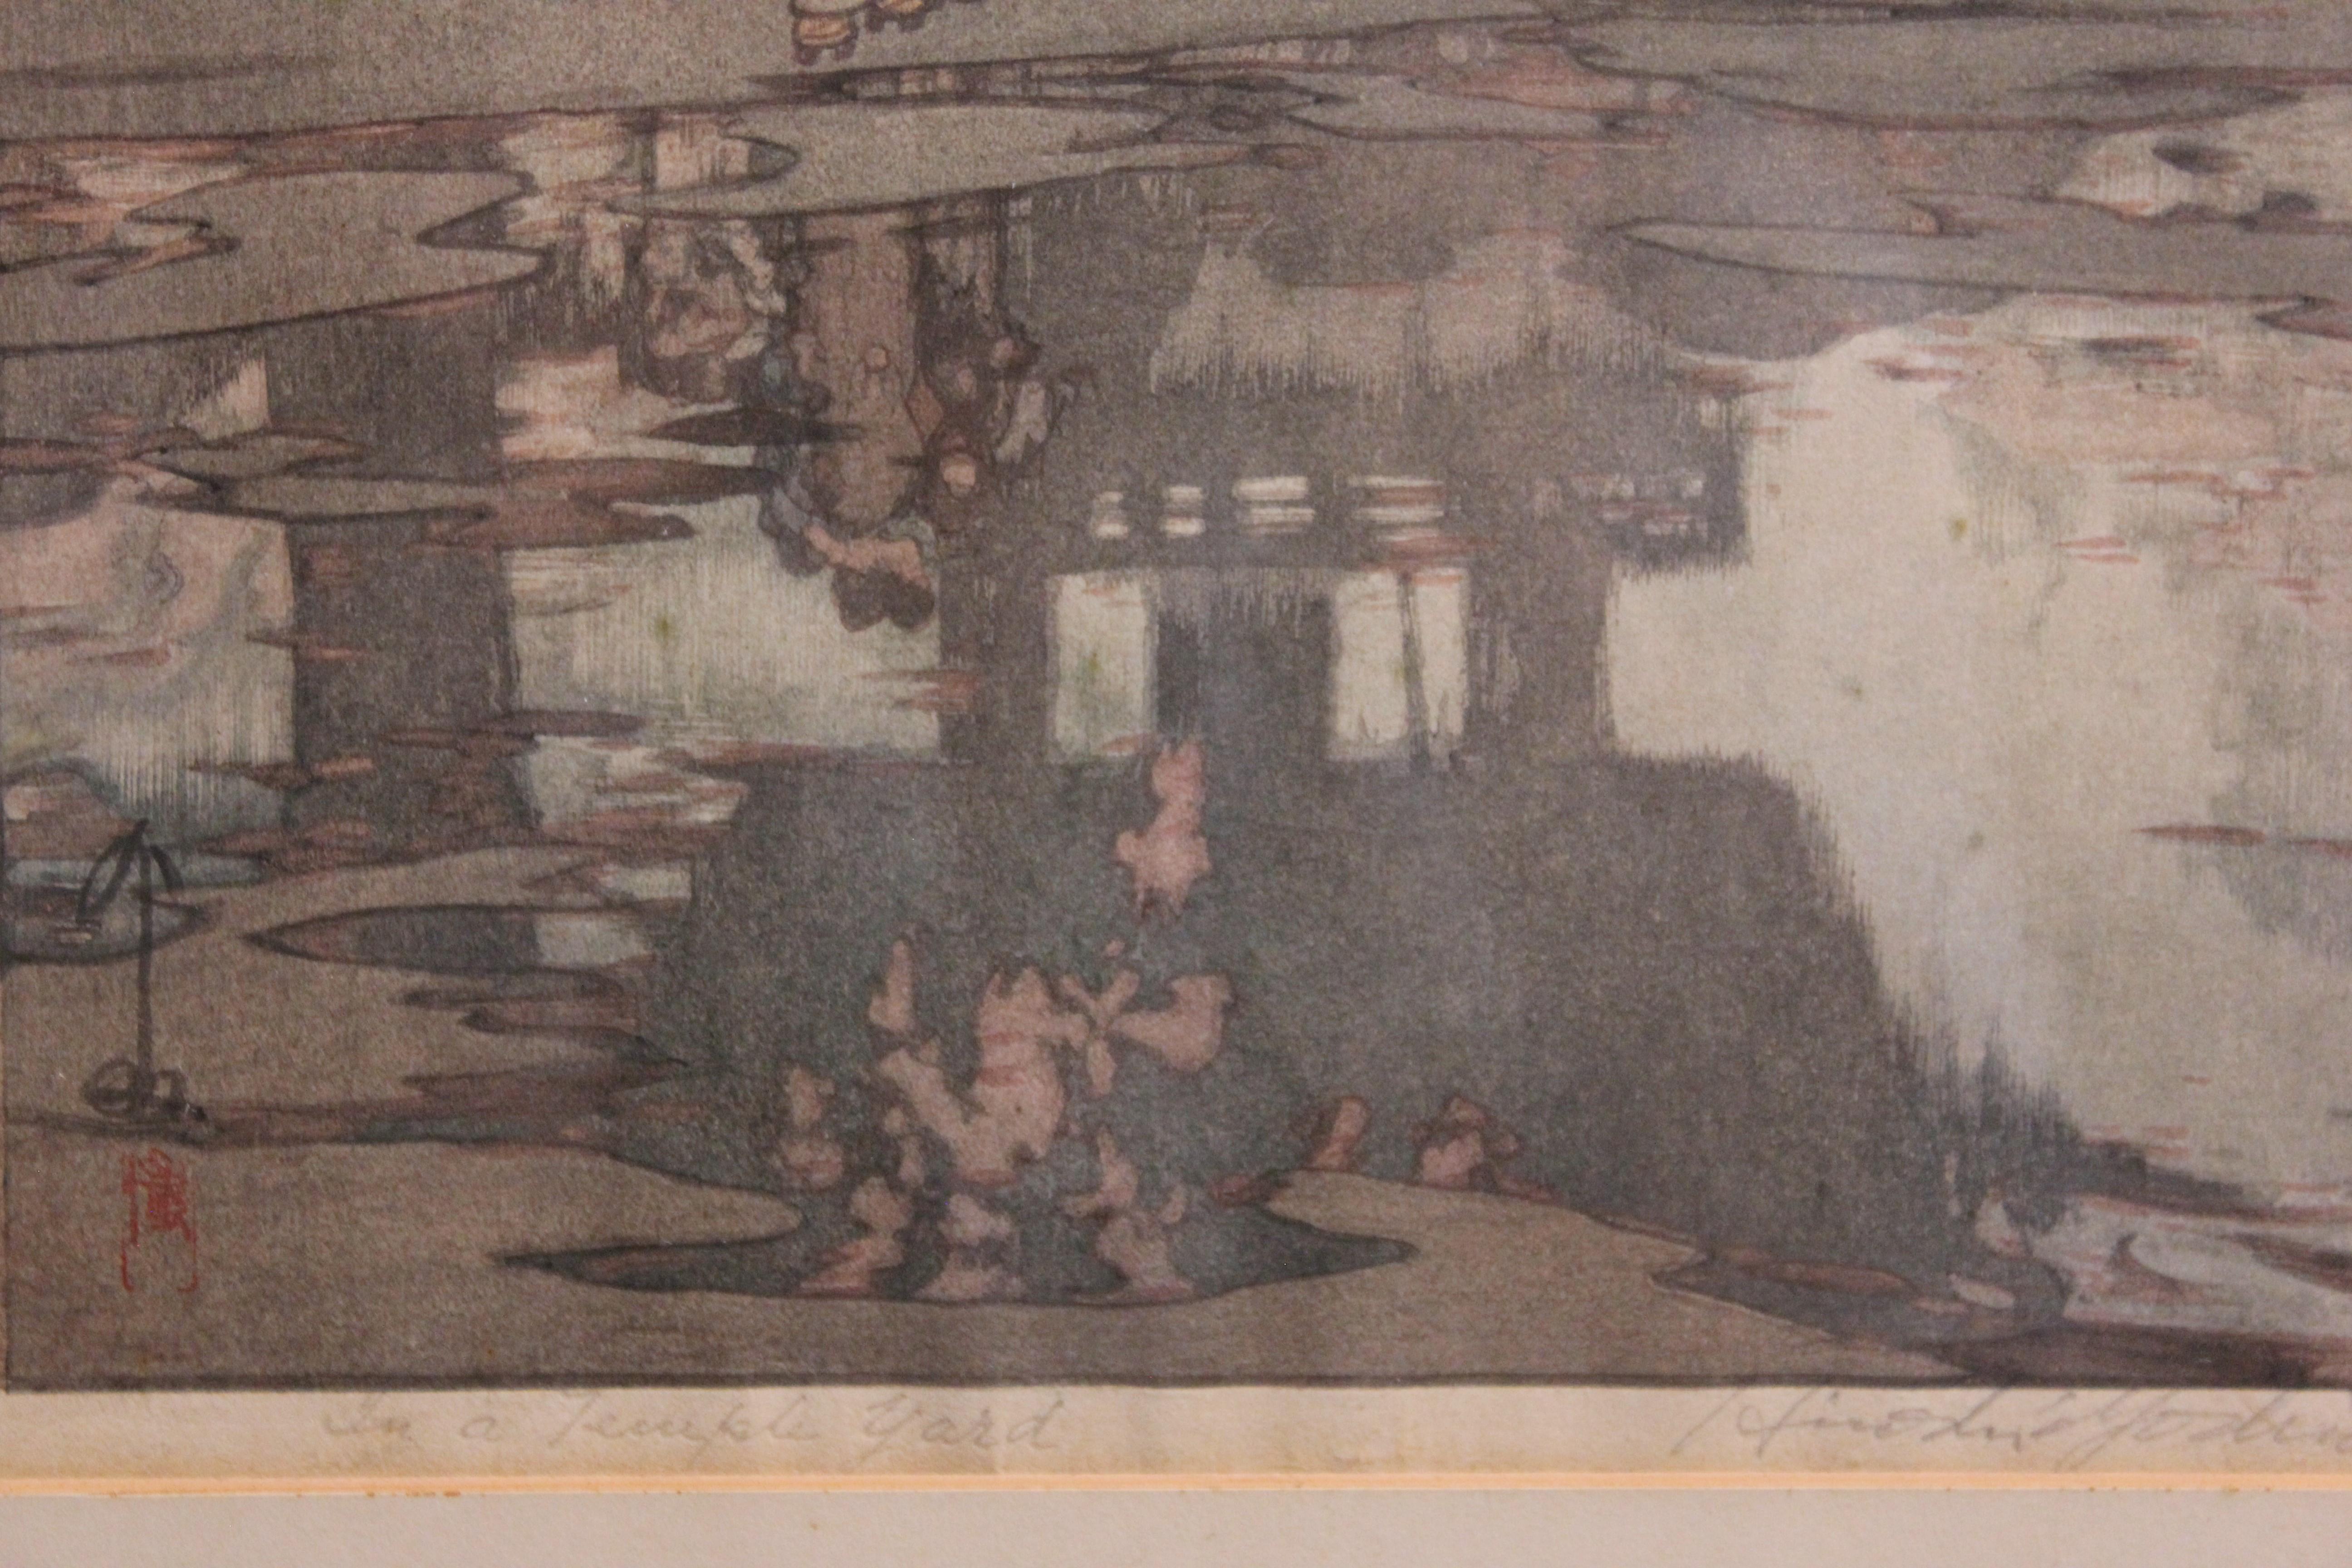 Beautiful Japanese woodblock print of three women in traditional dress standing under a cherry blossom tree in a temple yard by the artist Hiroshi Yoshida in 1935. Signed and titled along bottom edge. Hung in a brown wooden frame.

Artist